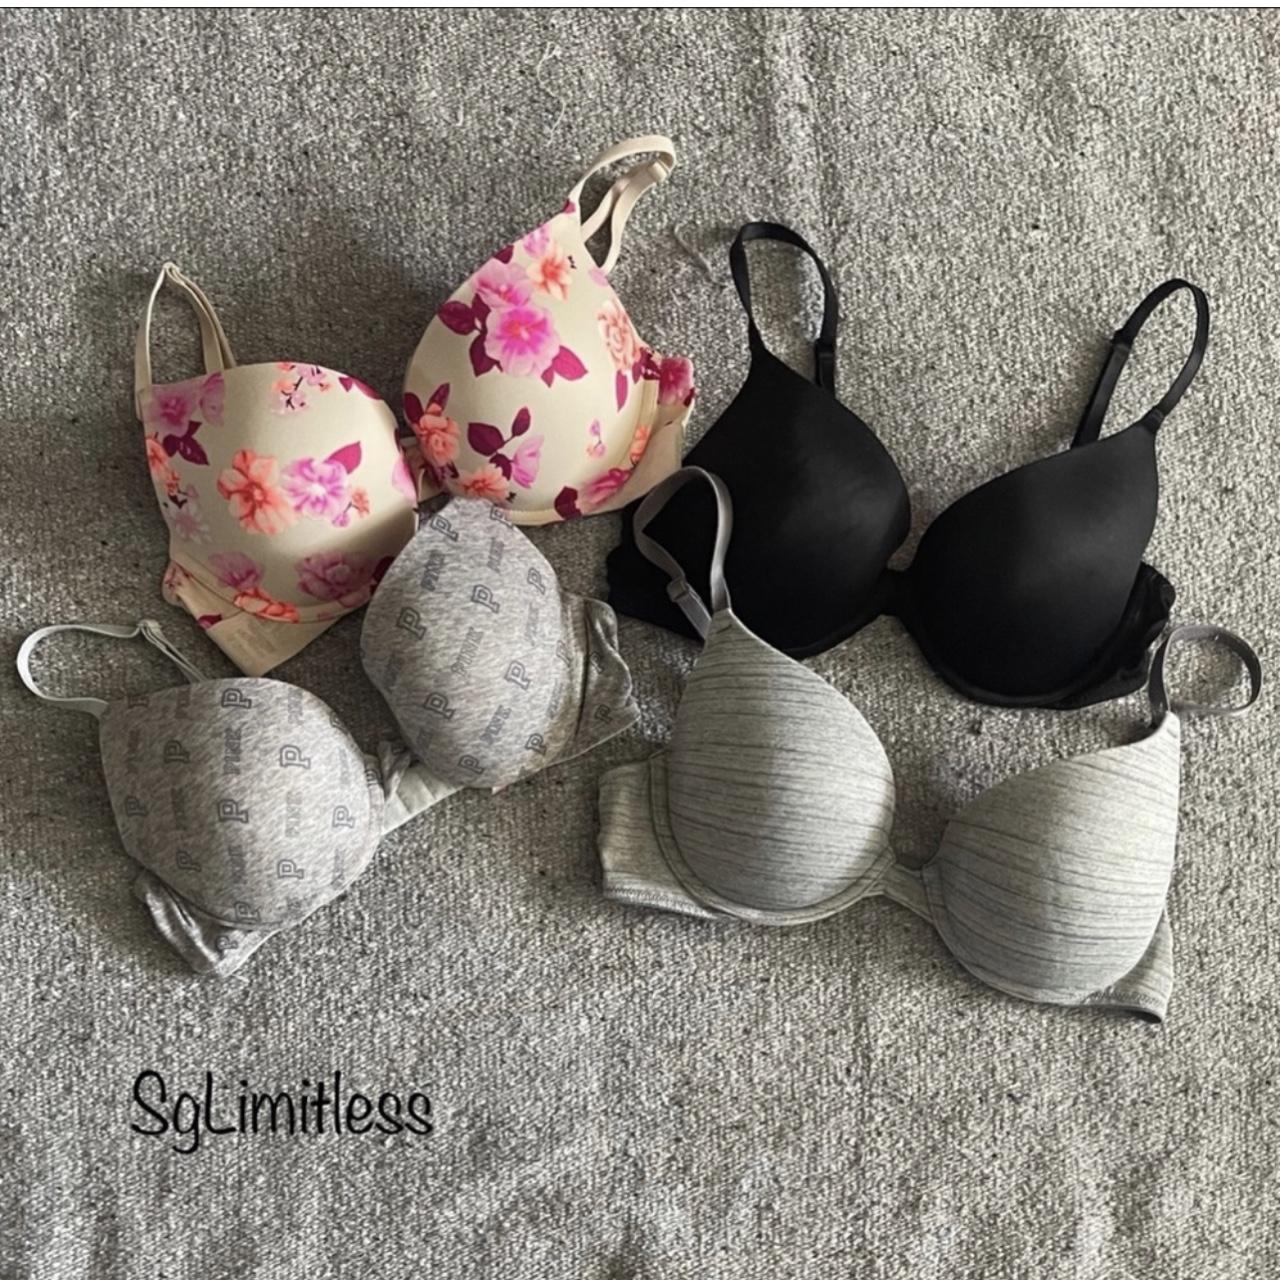 PINK VS lot of 4 push-up bras. One of the bras has